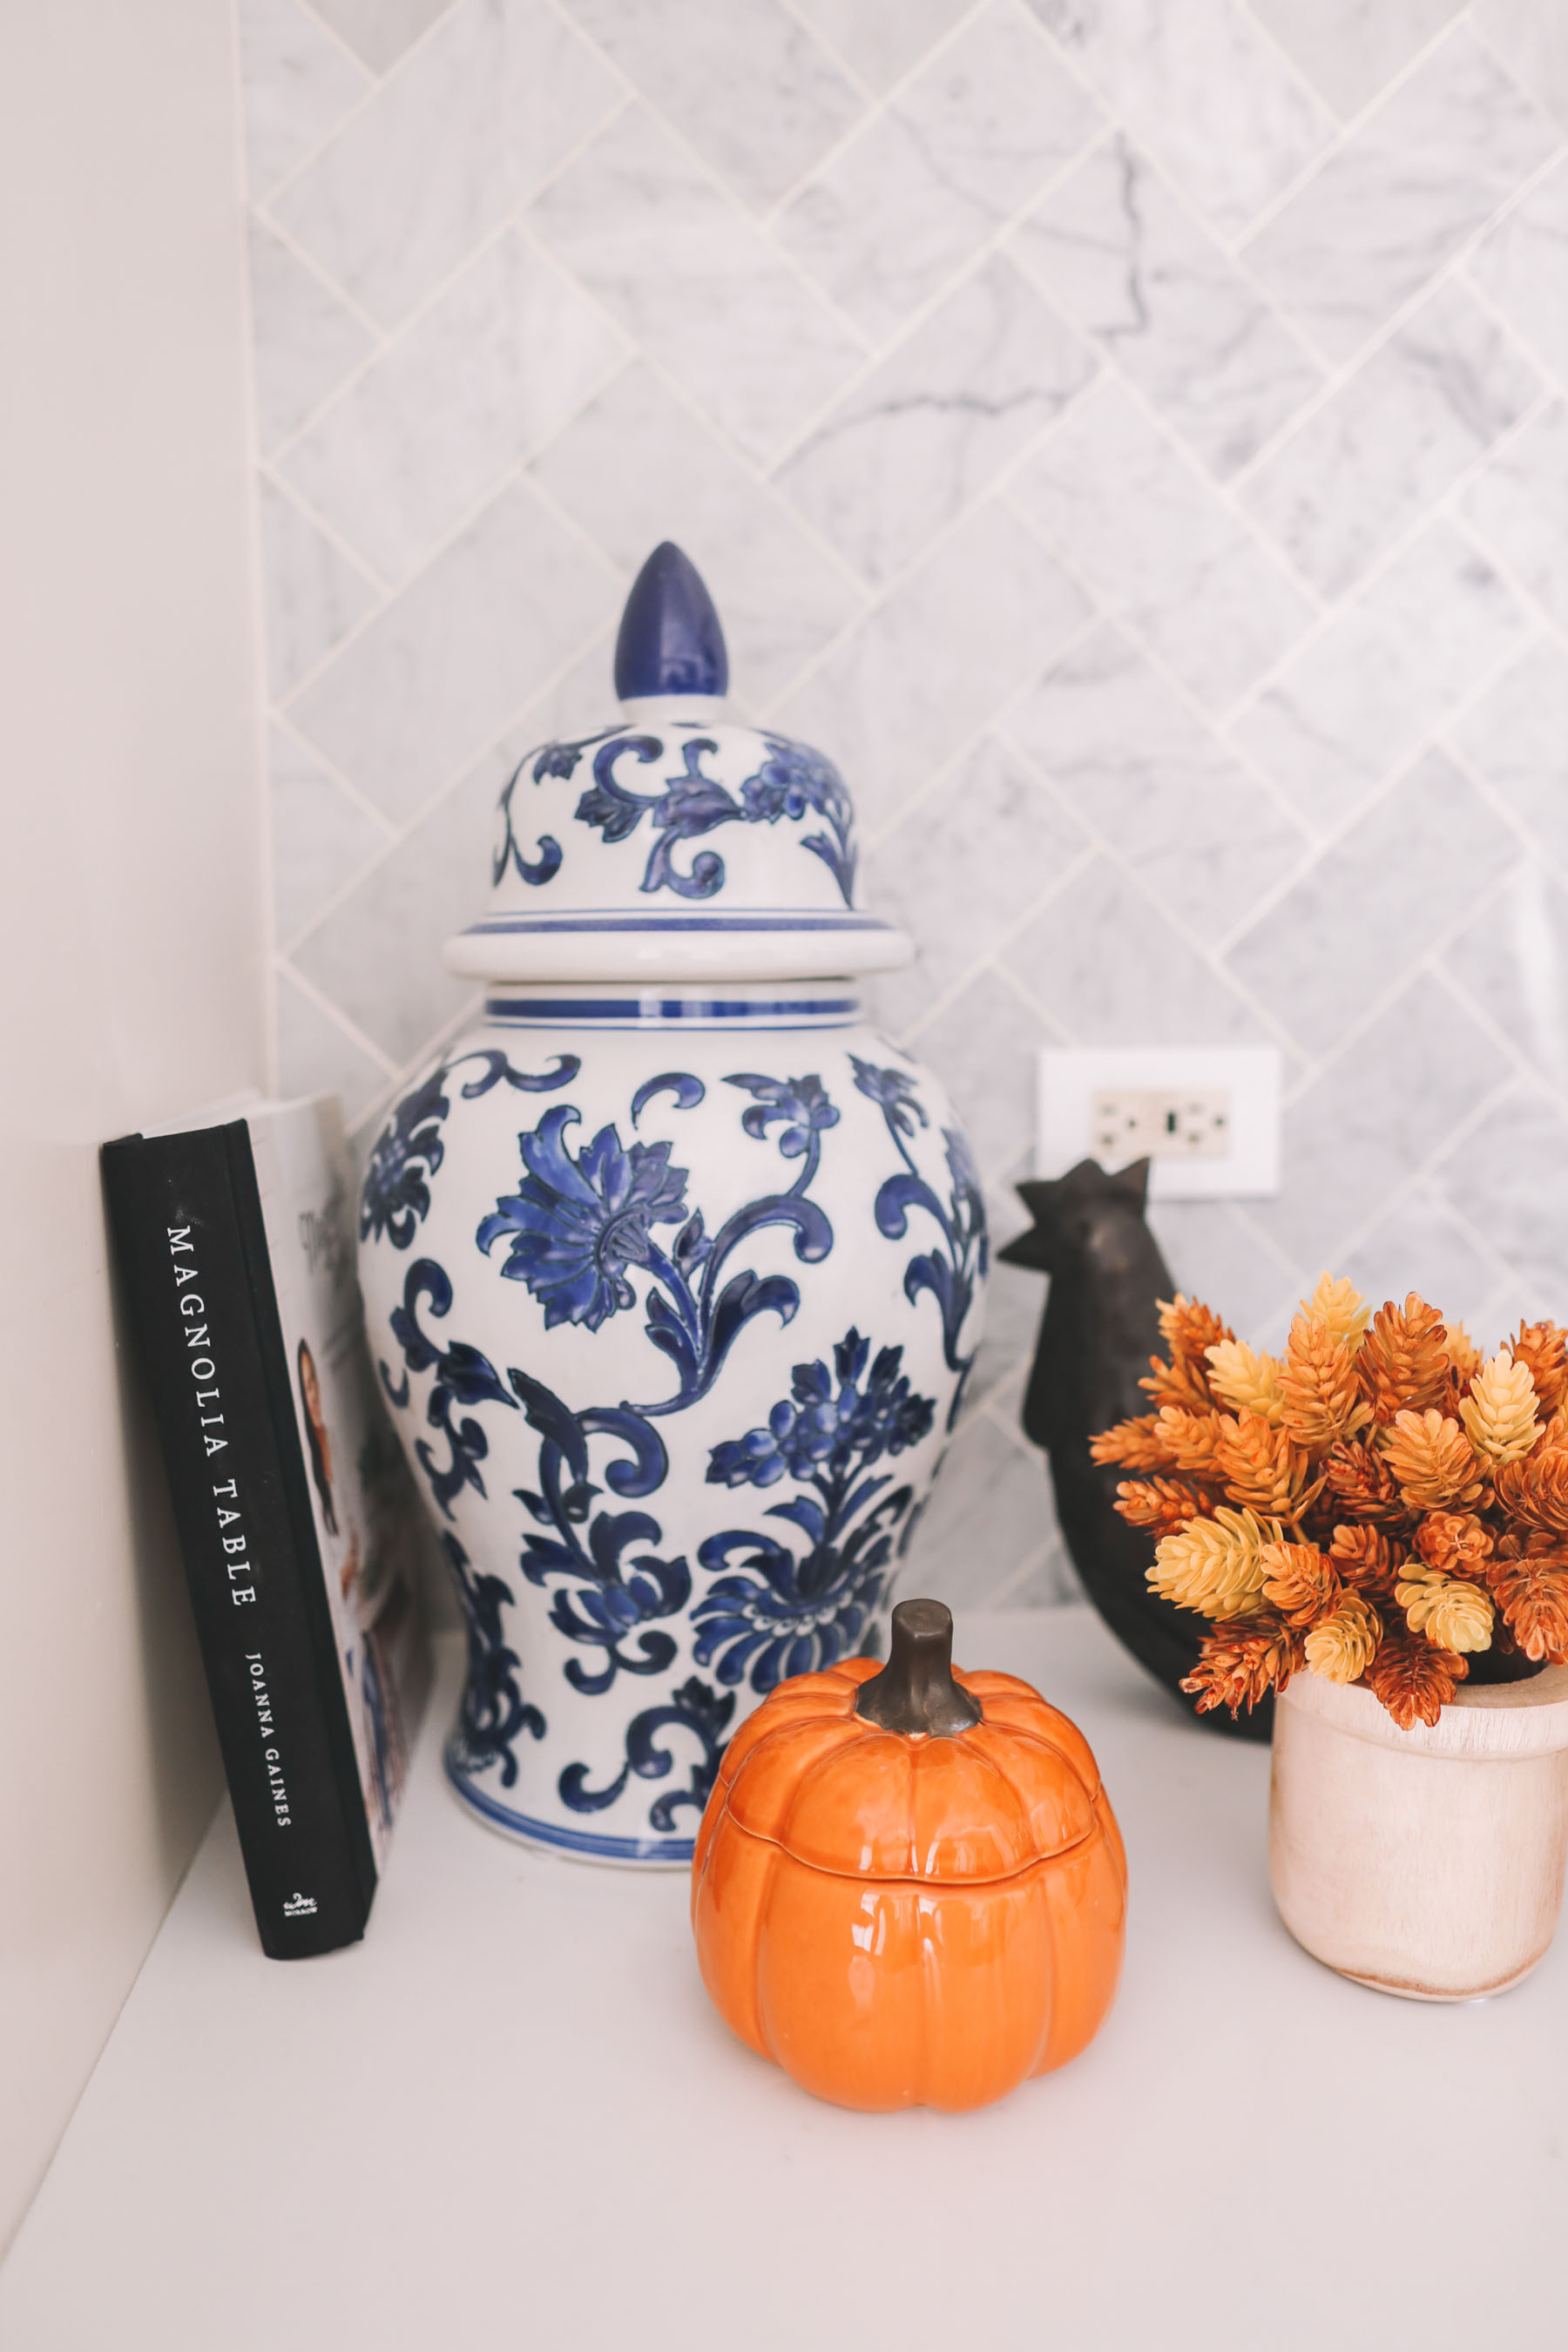 The Art of Rearranging Your Fall Decor